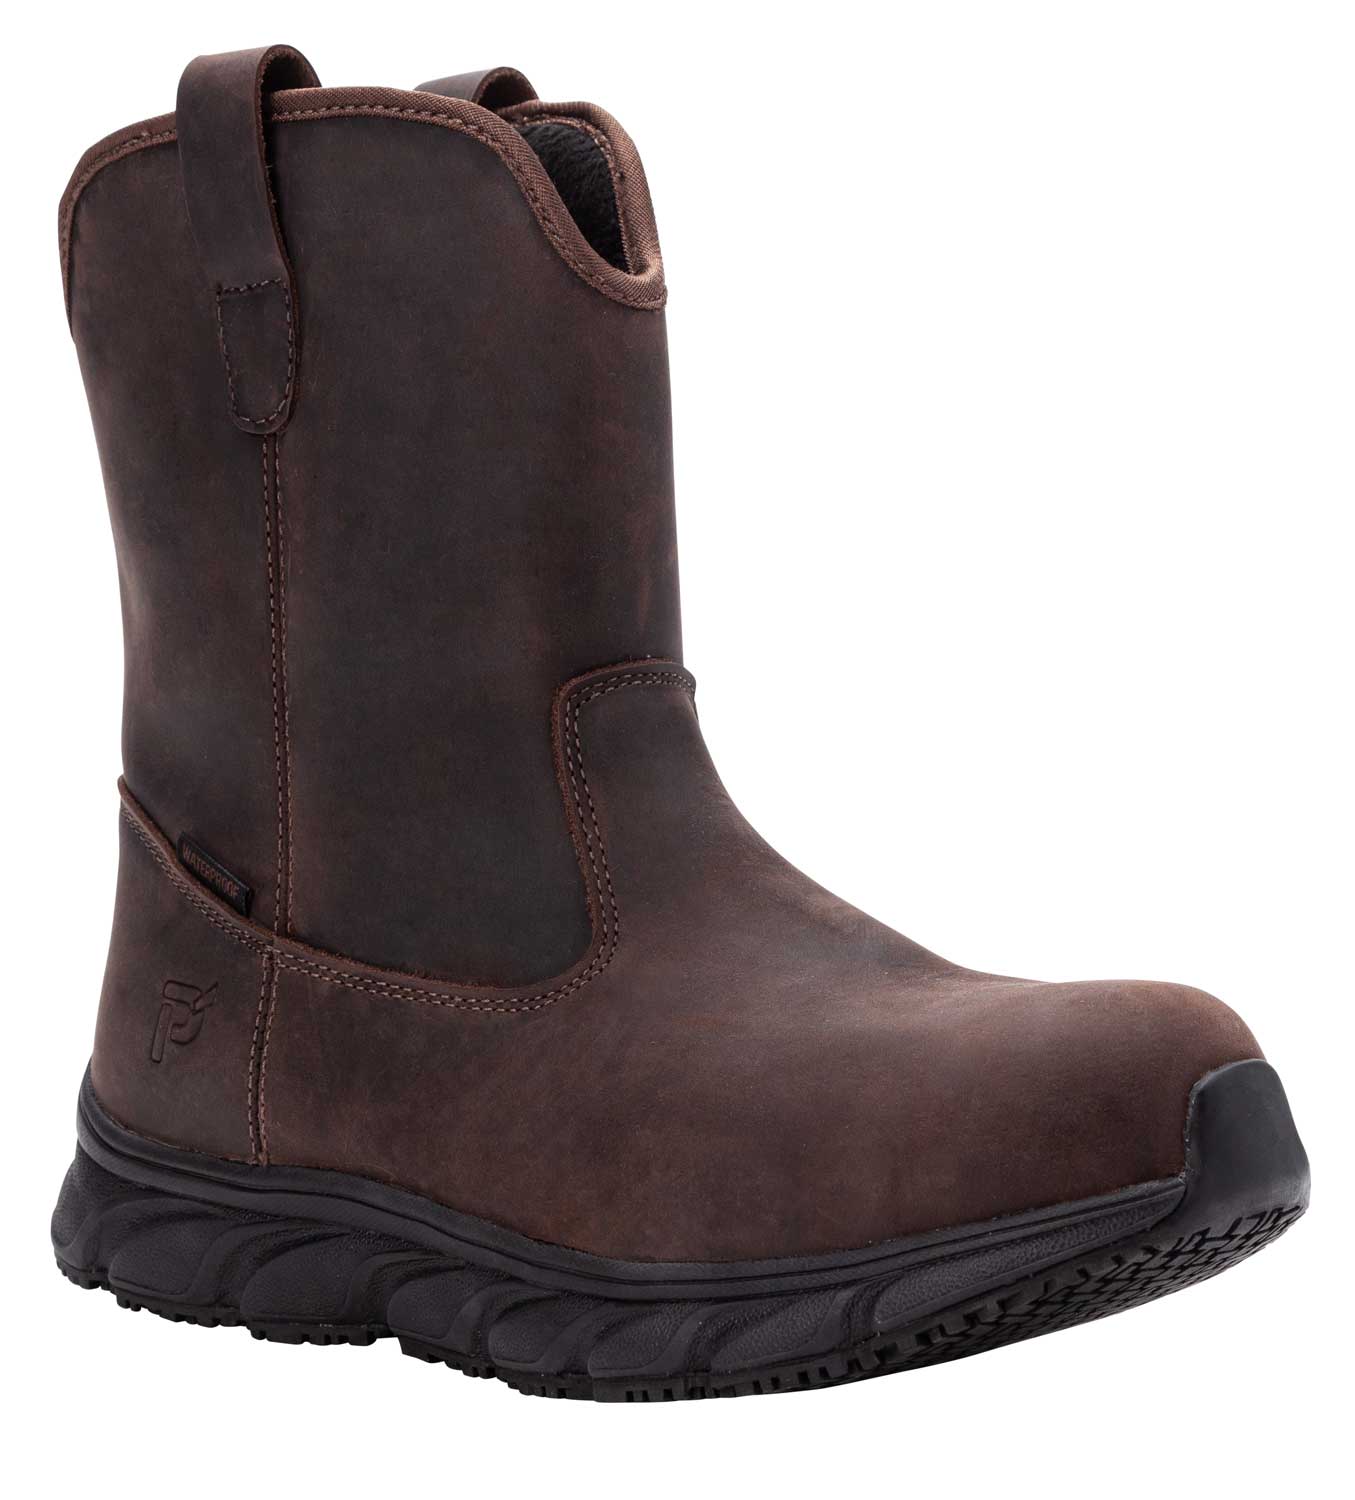 waterproof and slip resistant boots